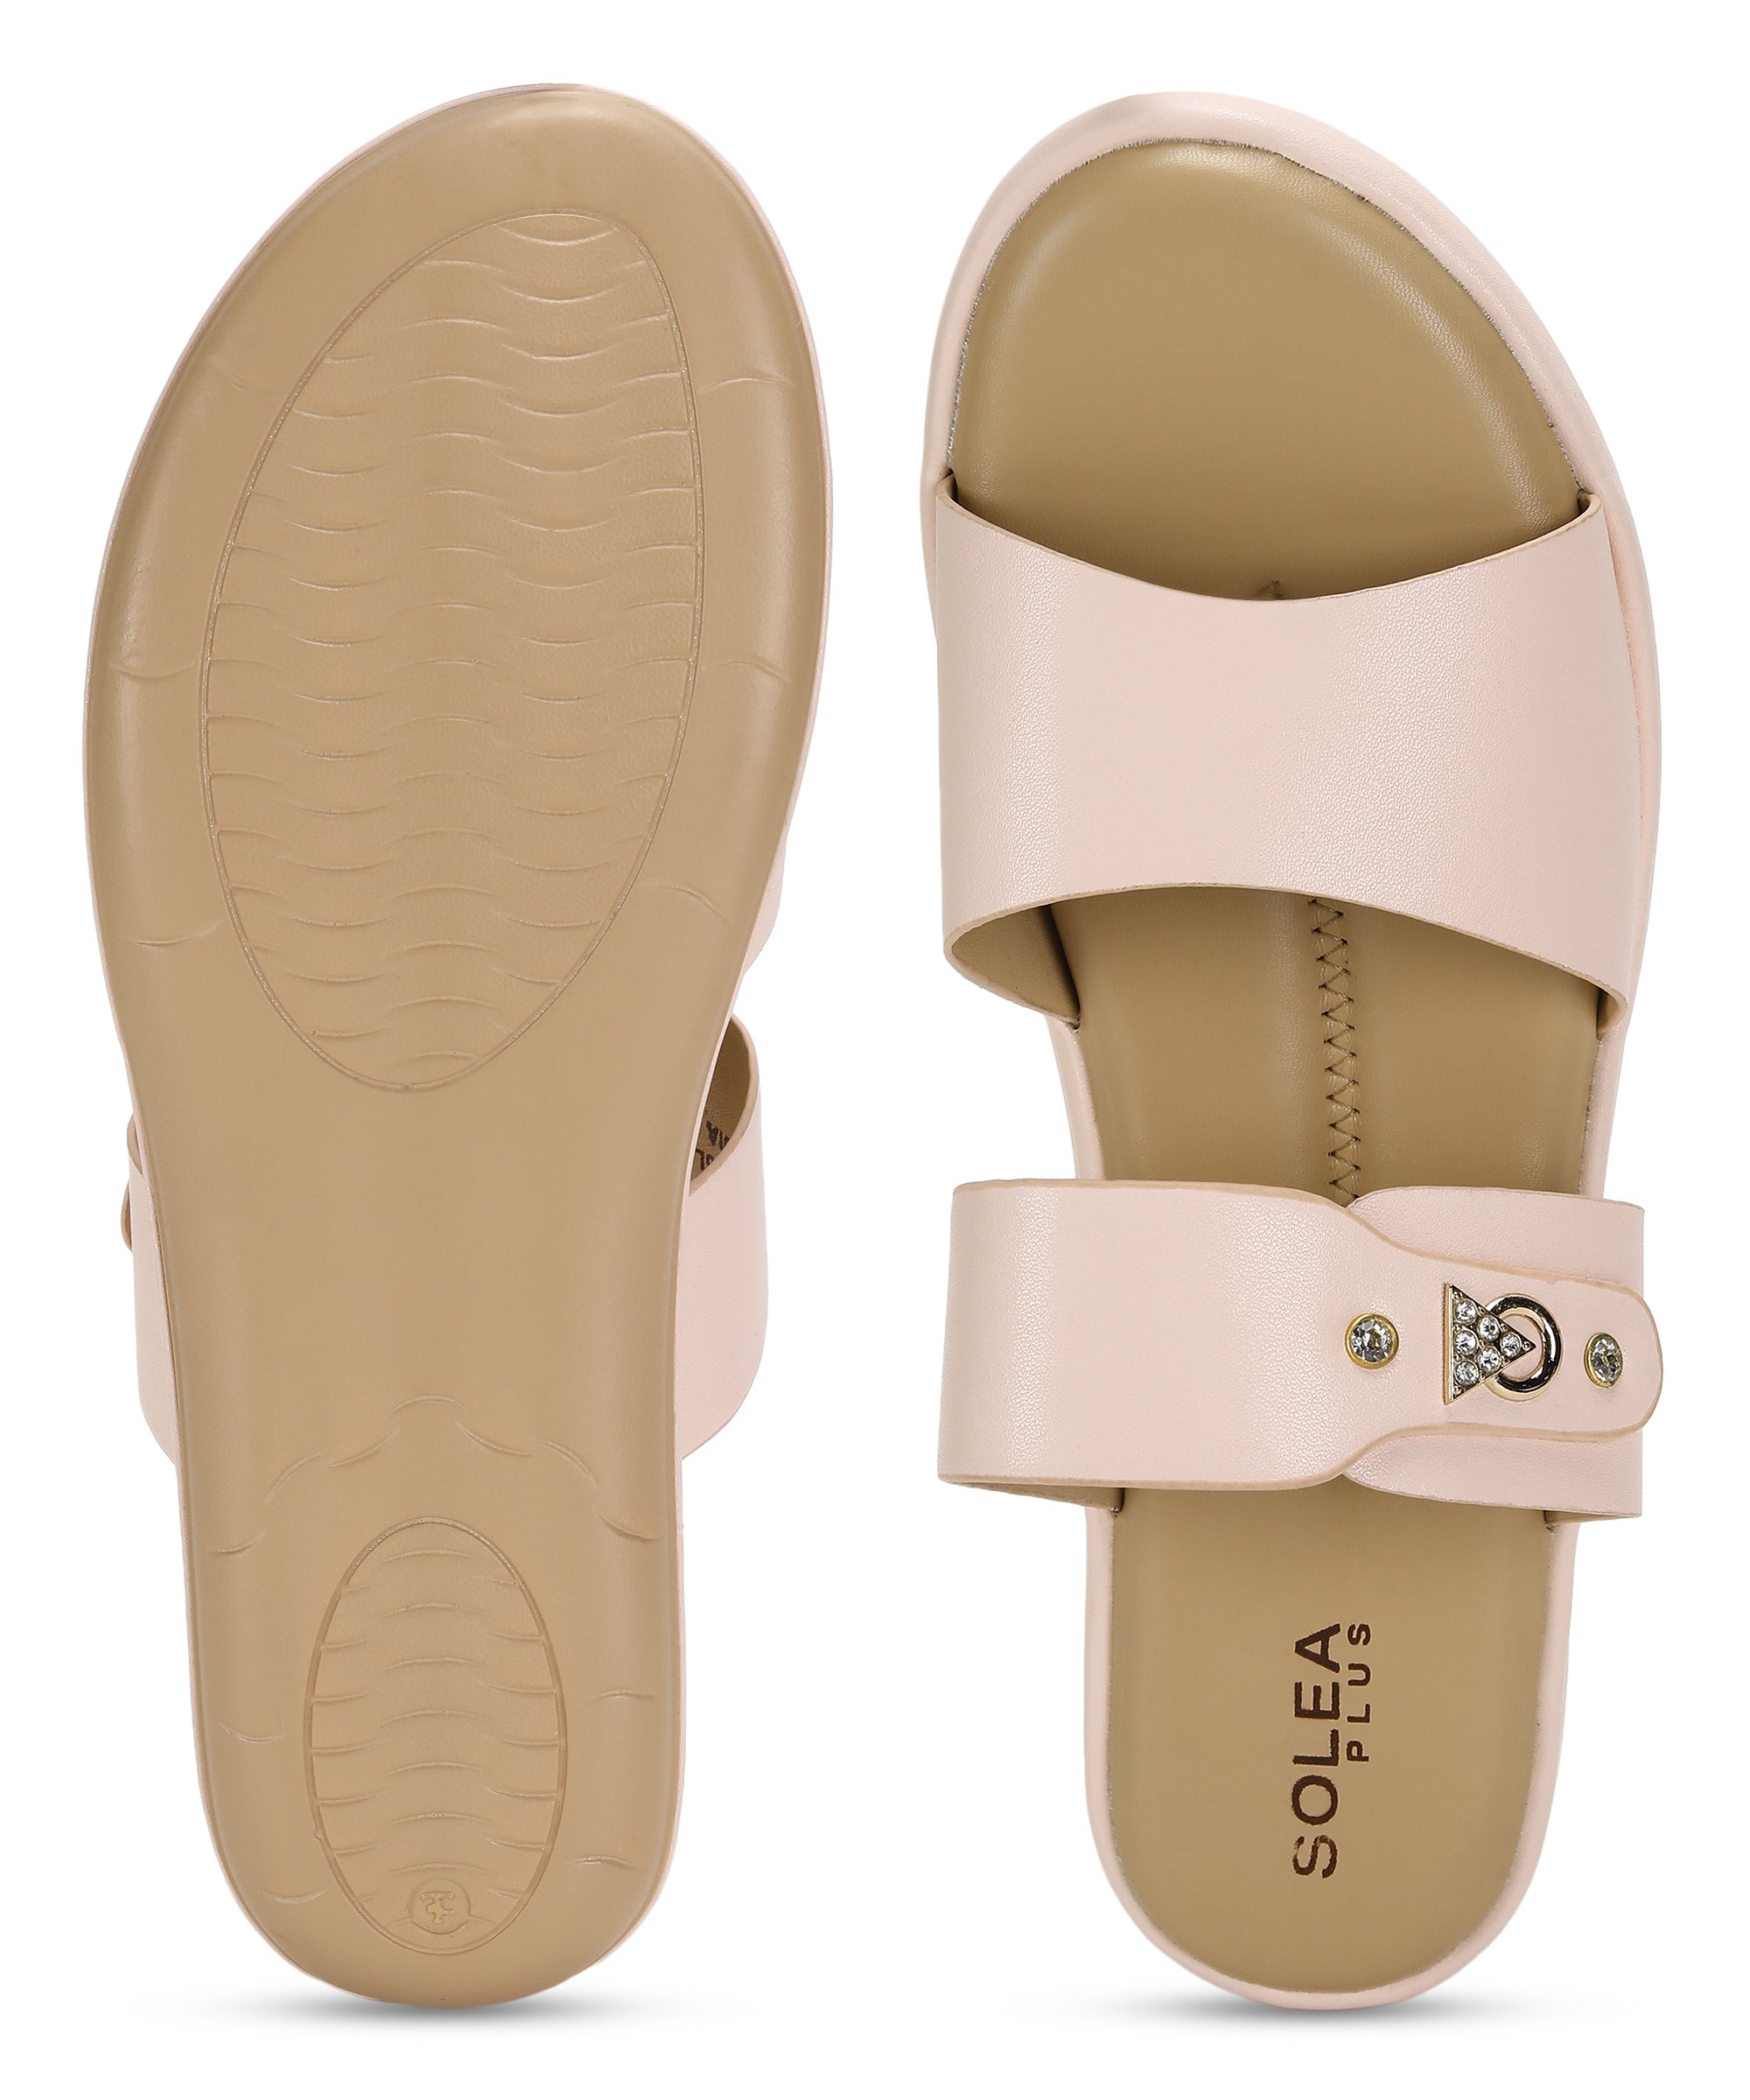 Paragon RK6026L Women Sandals | Casual &amp; Formal Sandals | Stylish, Comfortable &amp; Durable | For Daily &amp; Occasion Wear